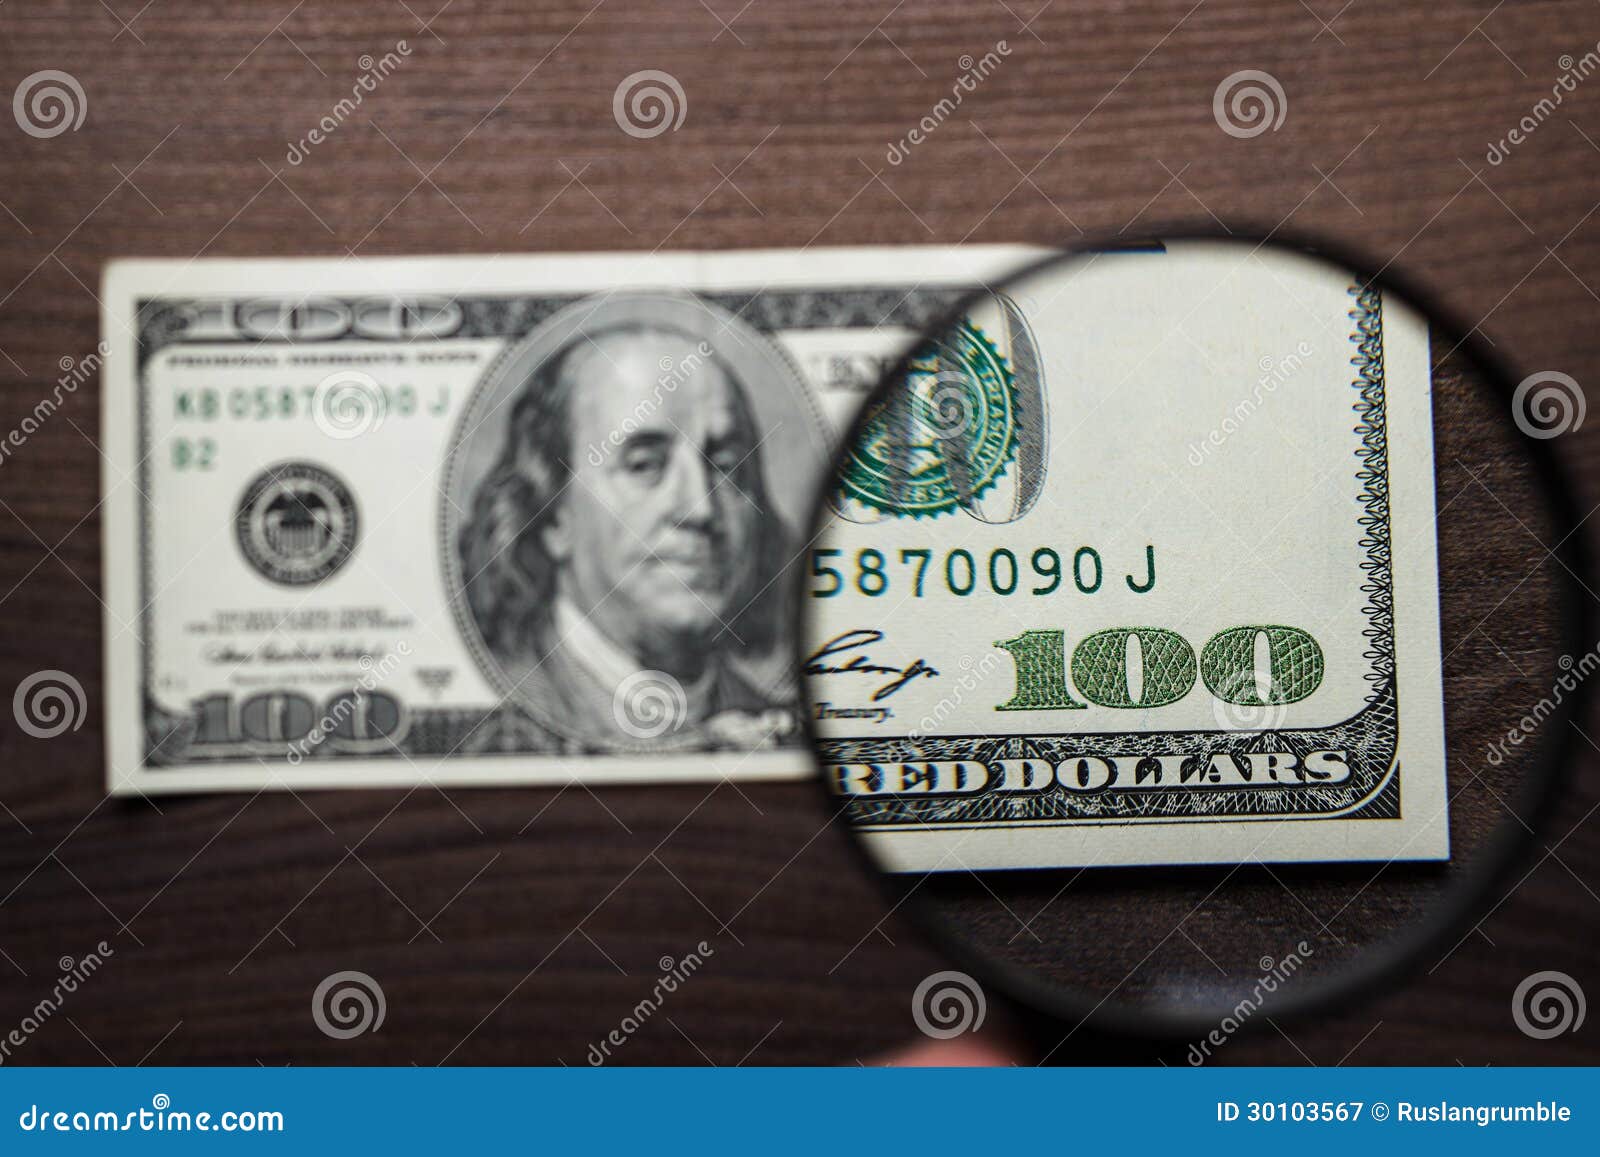 hundred dollars banknote authentication